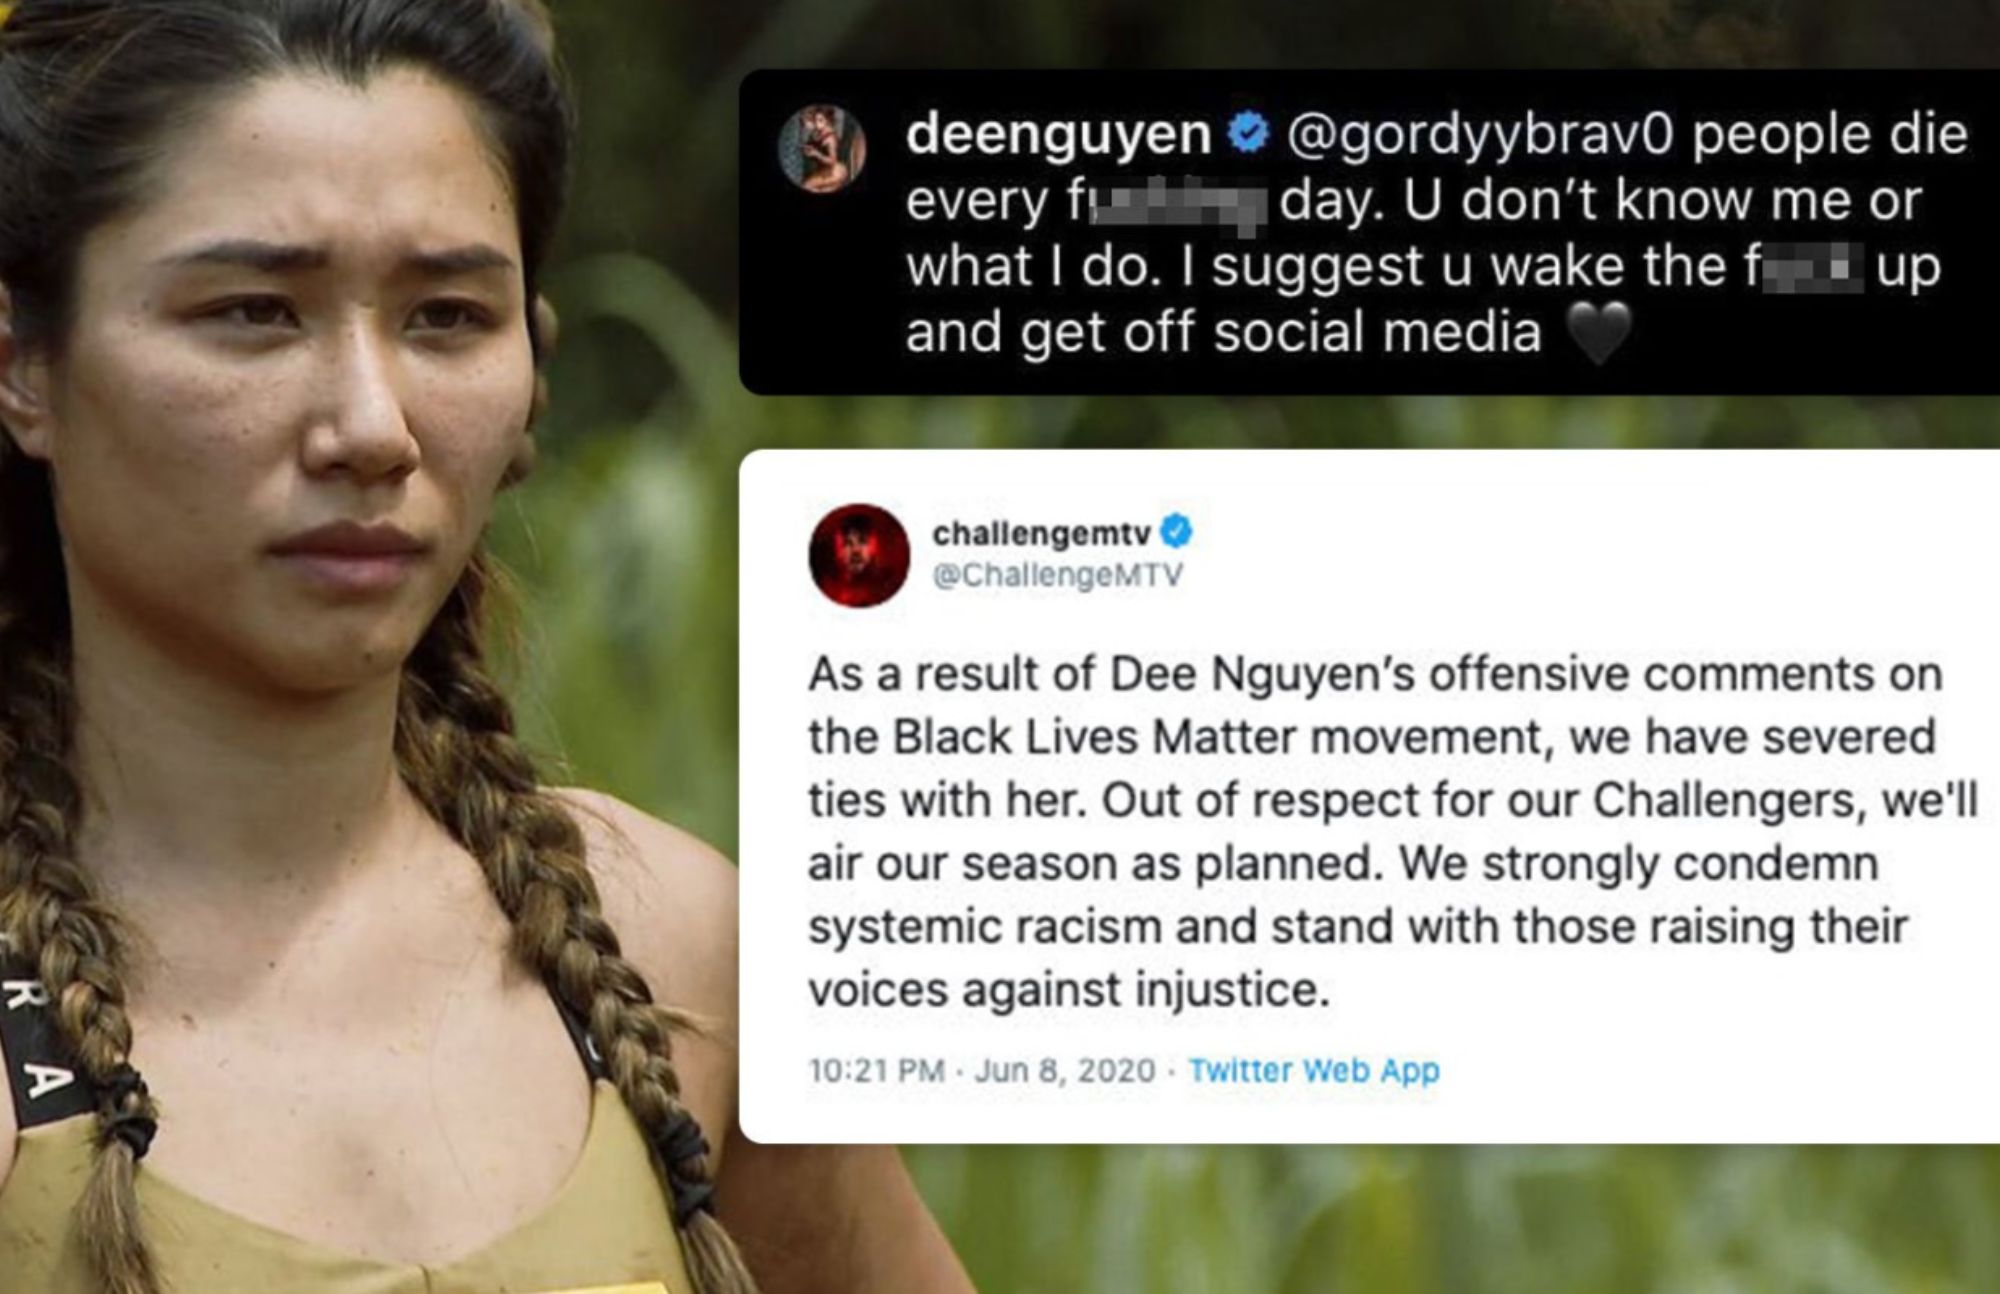 Dee Nguyen is looking straight somewhere with her social media posts and "The Challenger's" response